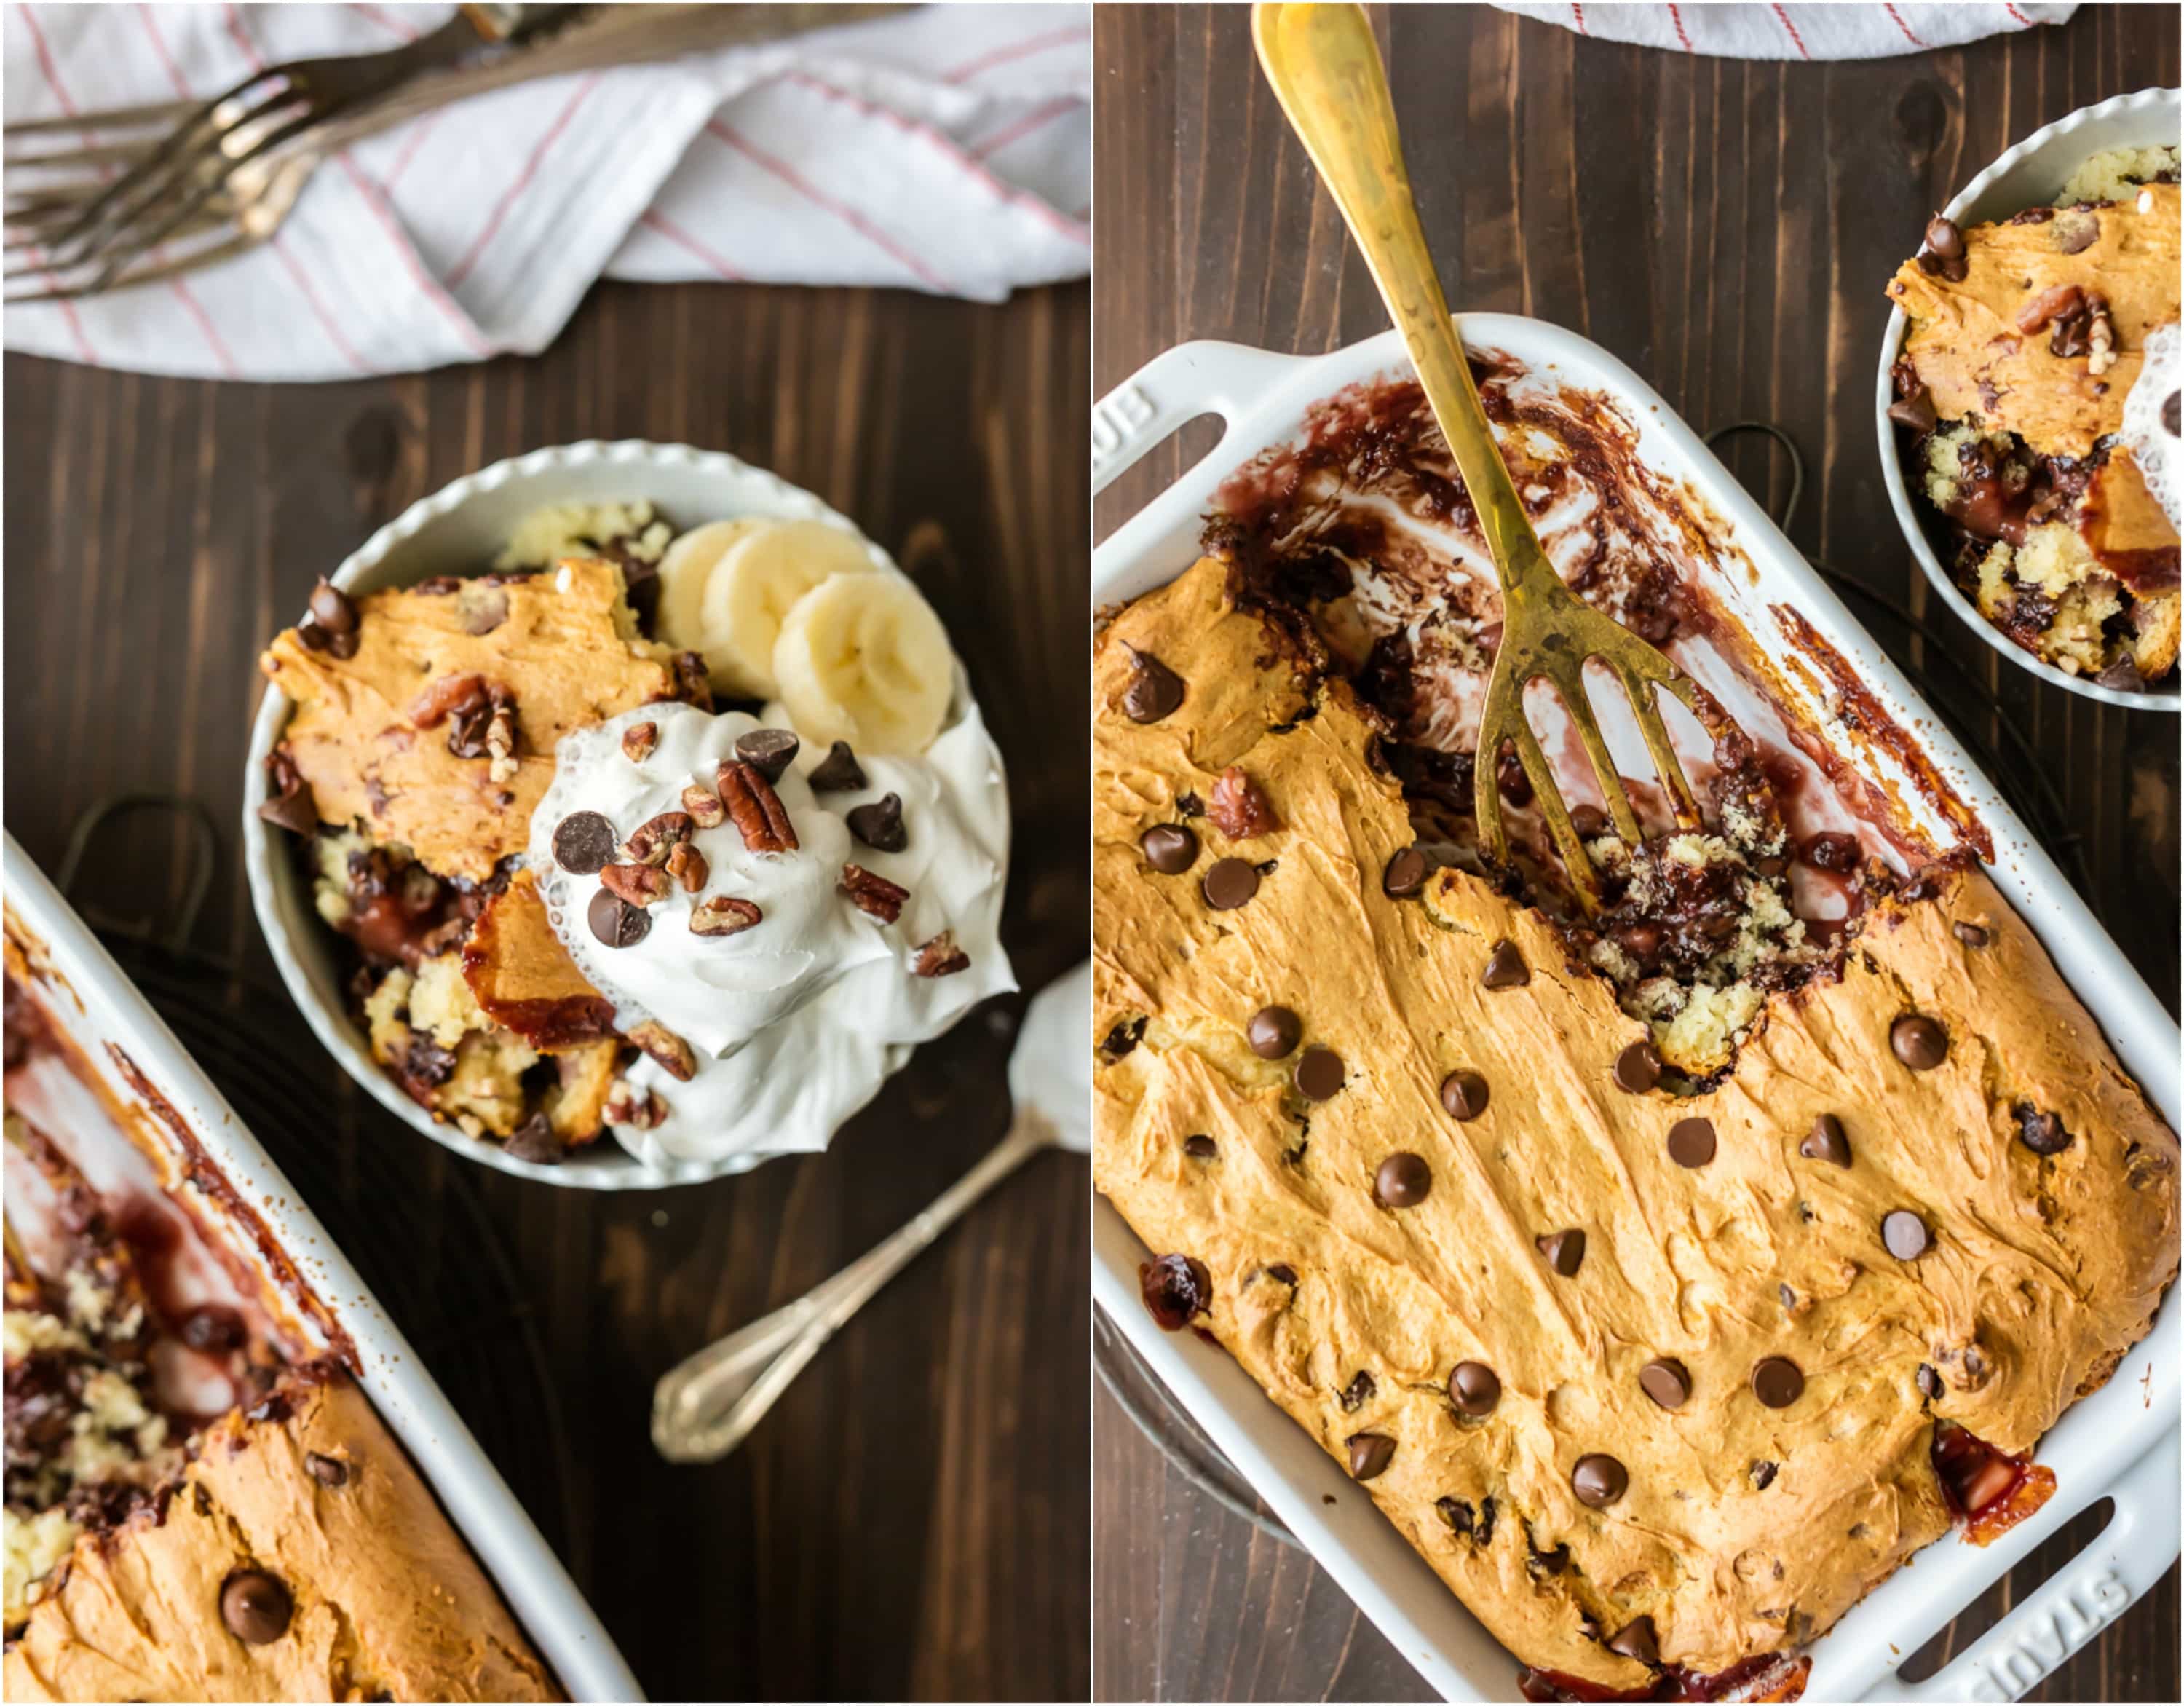 Banana Split Dump Cake is the BEST DESSERT EVER!! This dump cake is thrown together in minutes with just 6 ingredients and is sure to be an instant crowd pleaser!